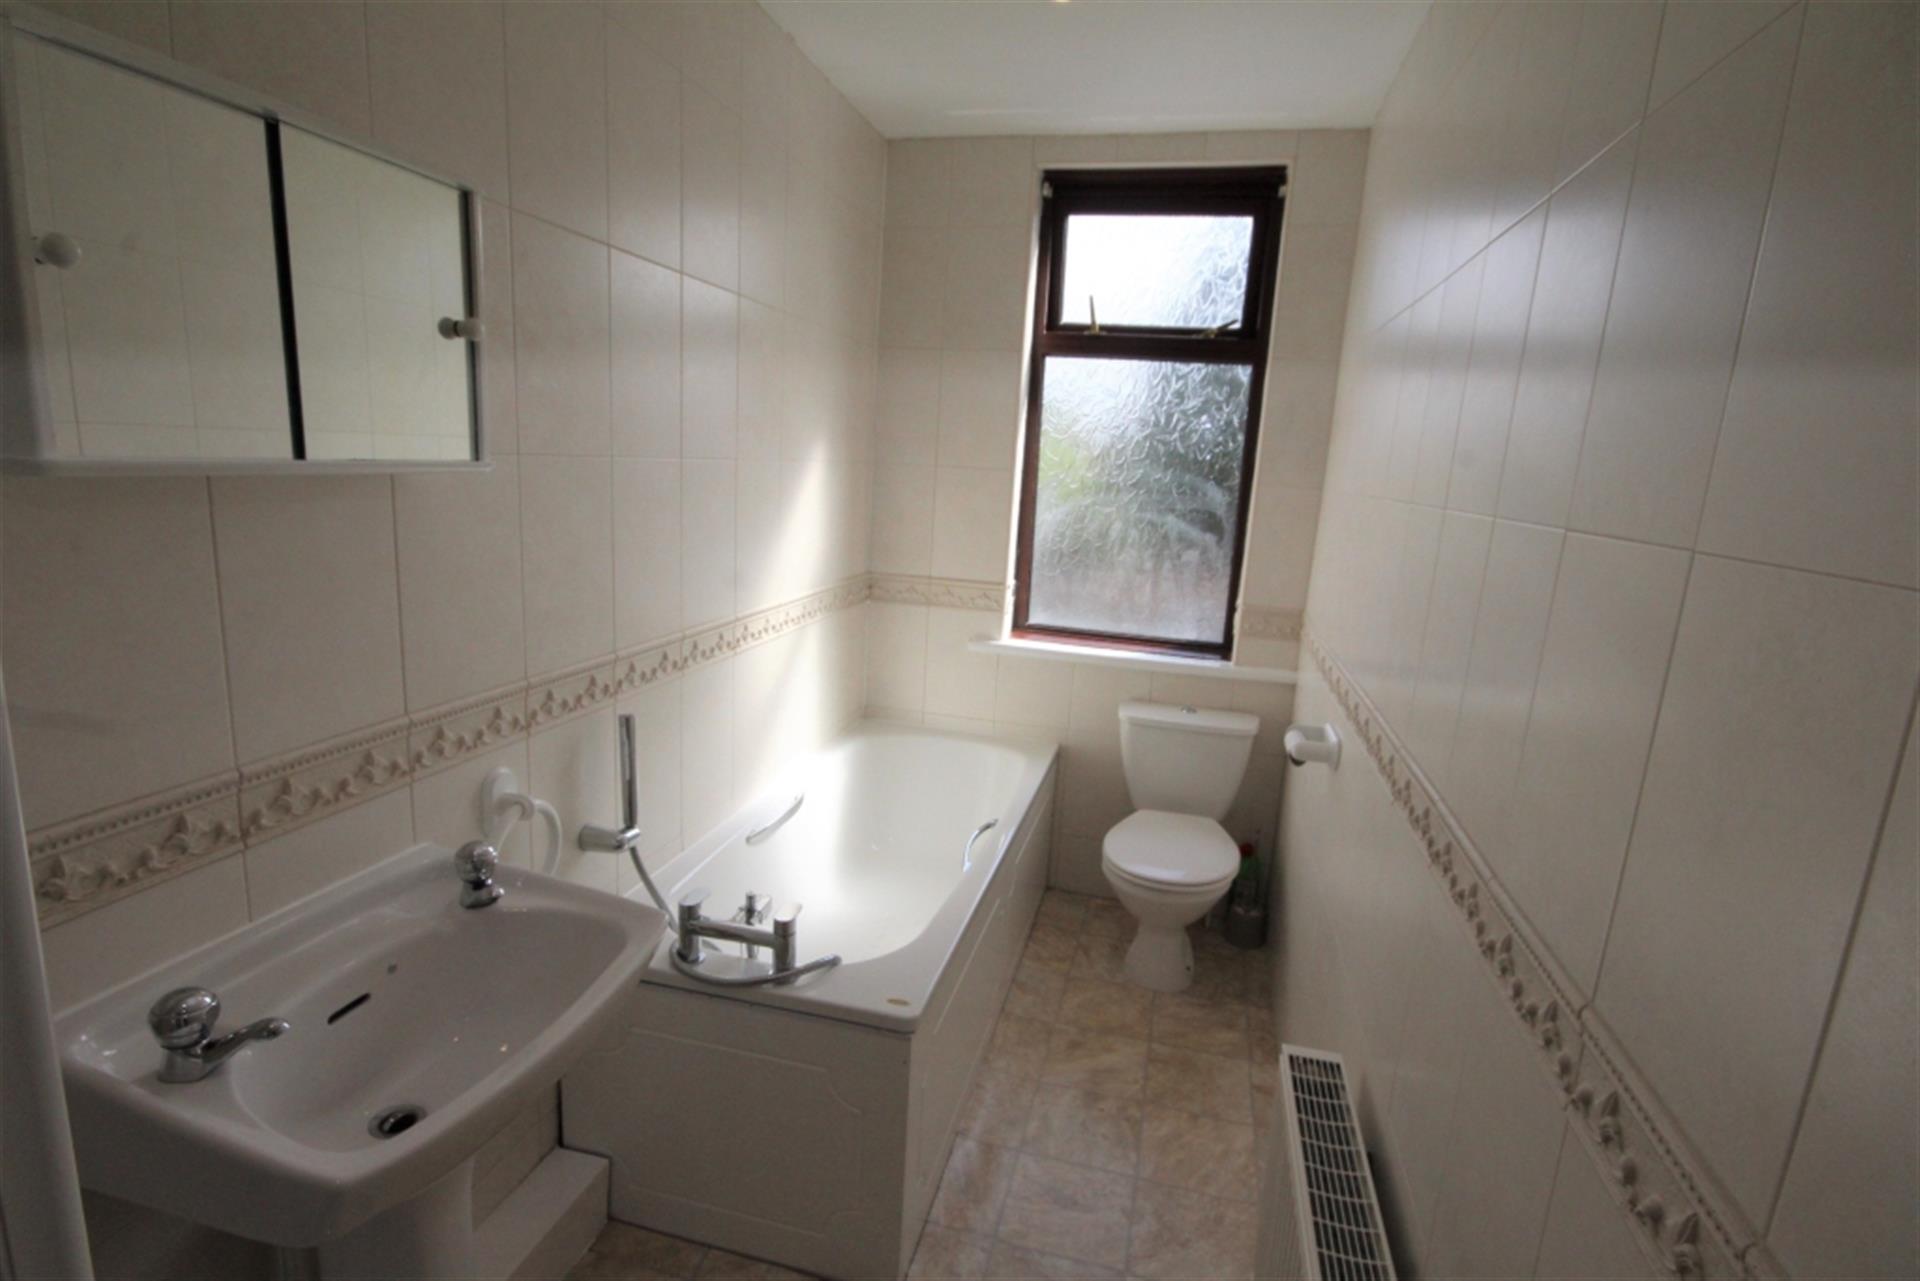 1 bedroom house share house / flat share To Let in Smithills, Bolton, Lancs - Bathroom